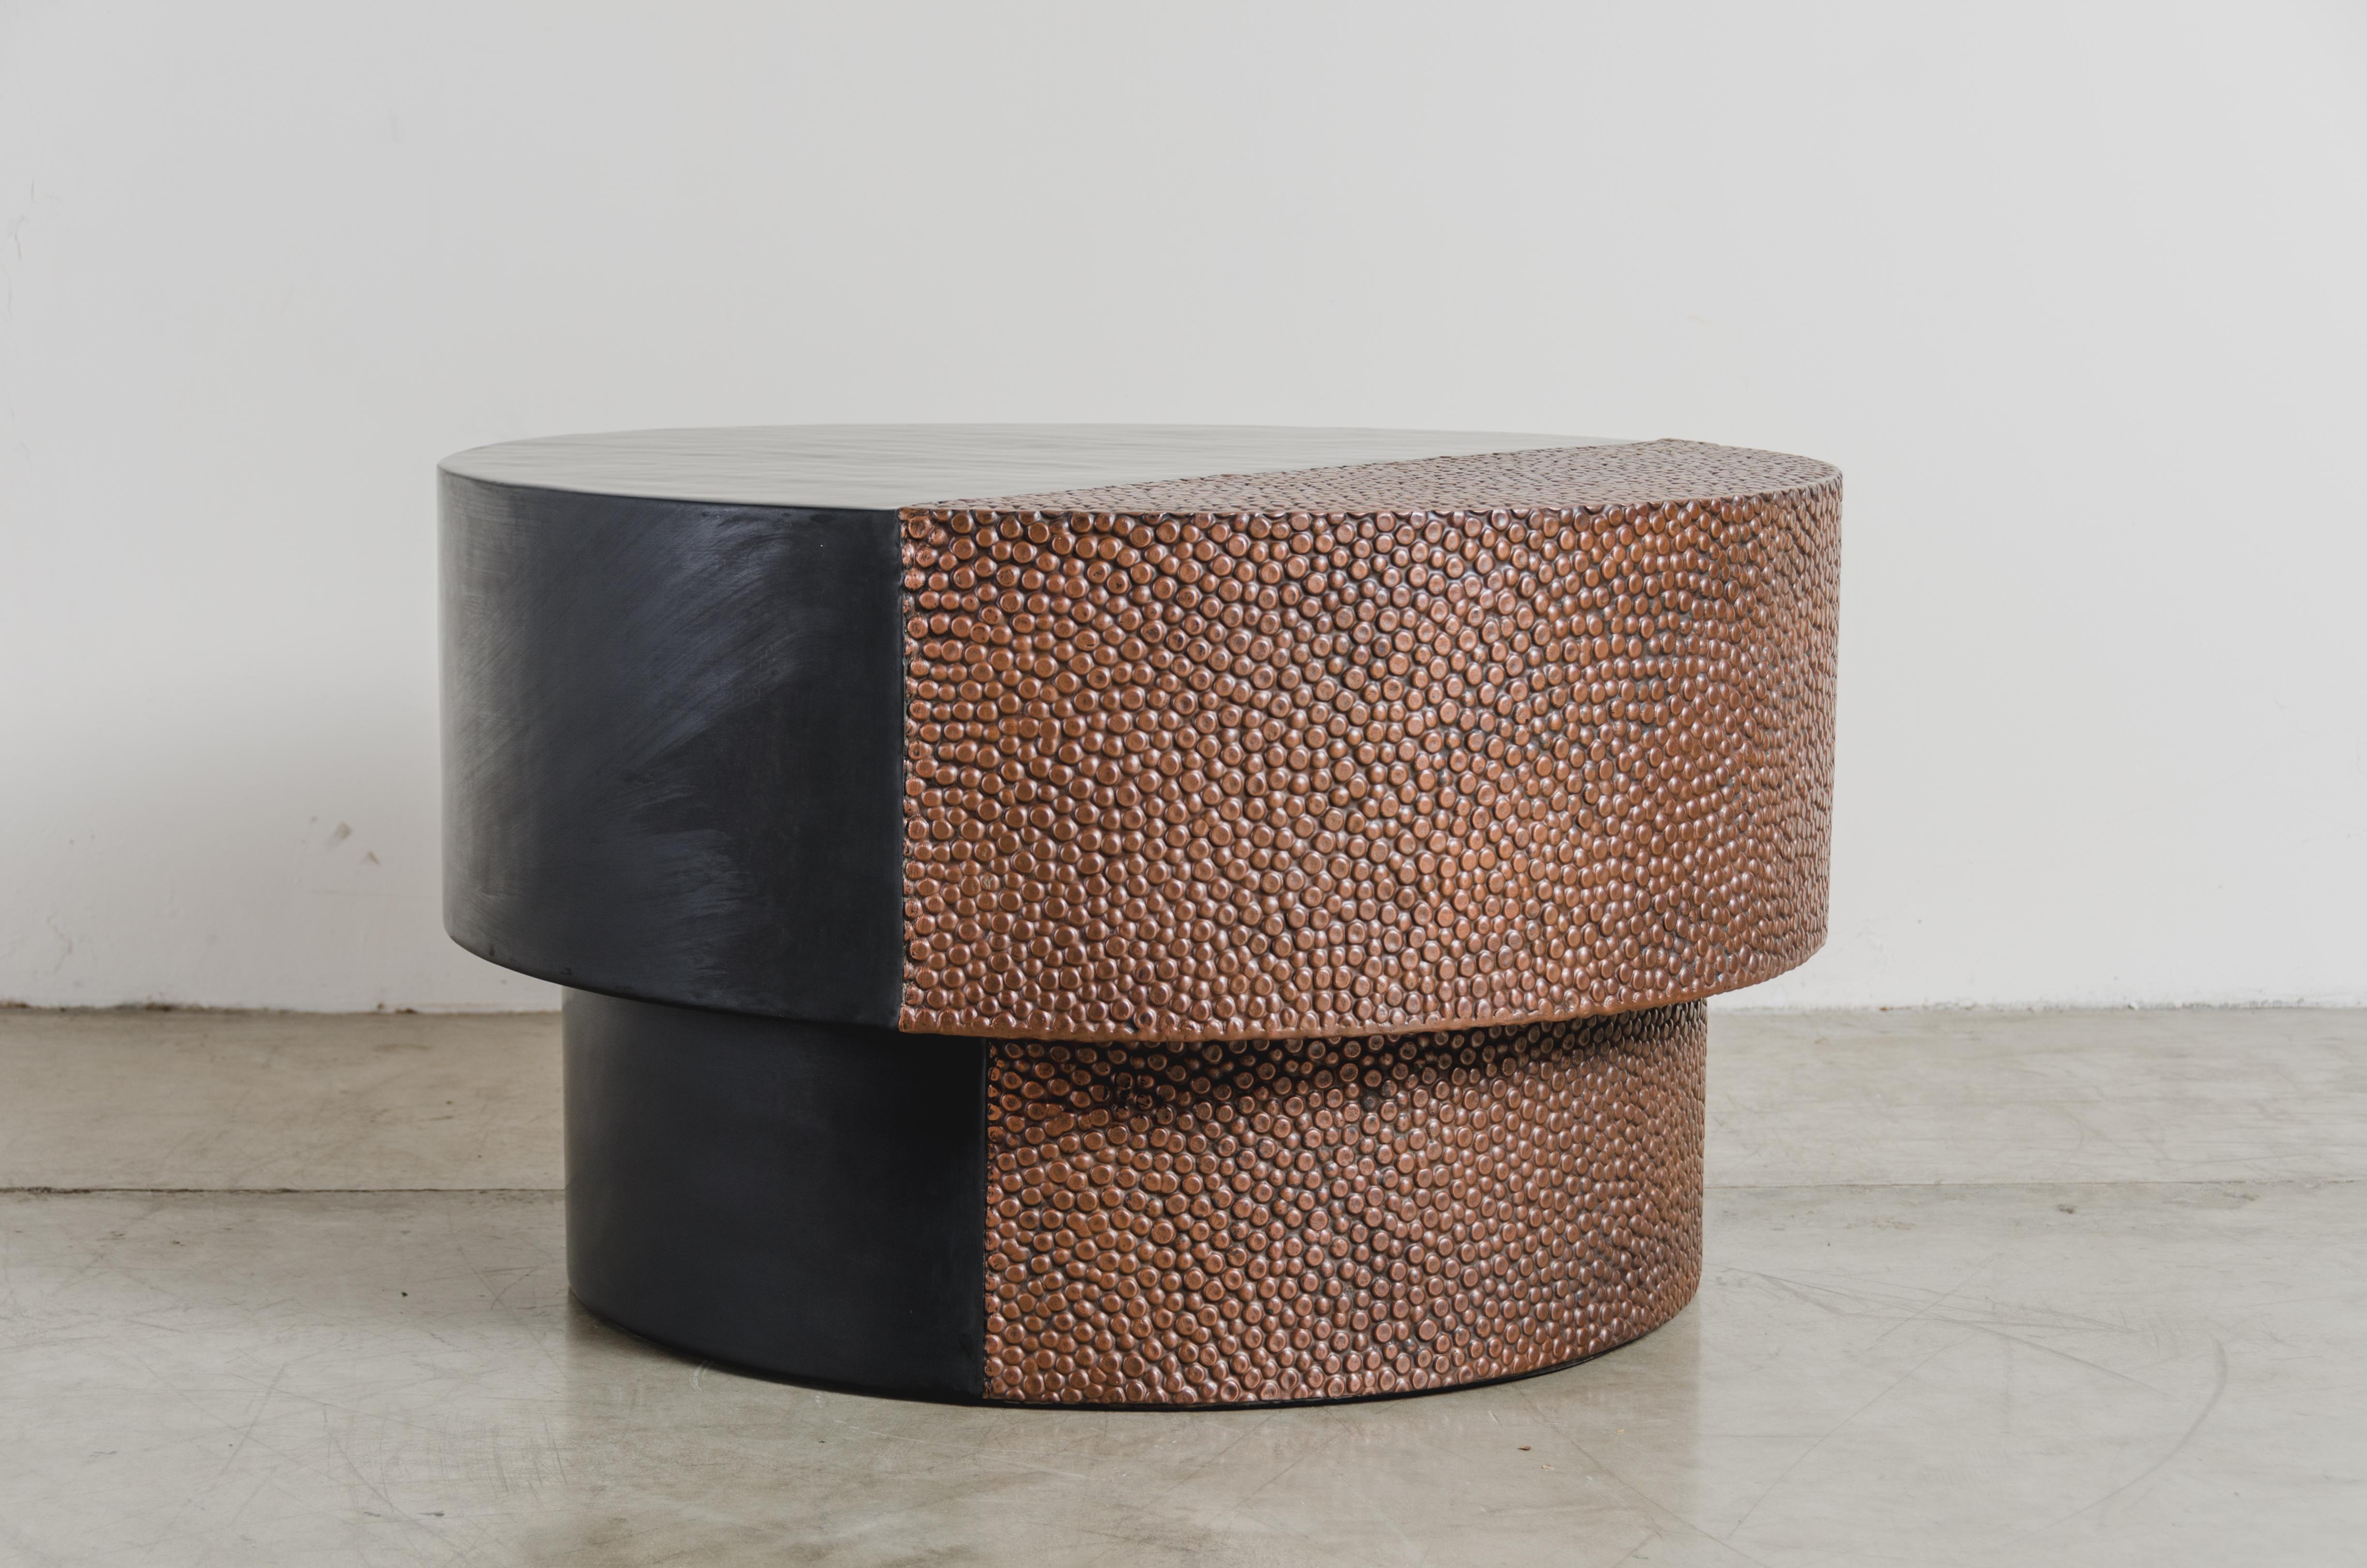 Drum table with toad skin design
Antique copper
Black copper
Hand repousse
Limited edition
Each piece is individually crafted and is unique.

Repousse is the traditional art of hand-hammering decorative relief onto sheet metal. The technique